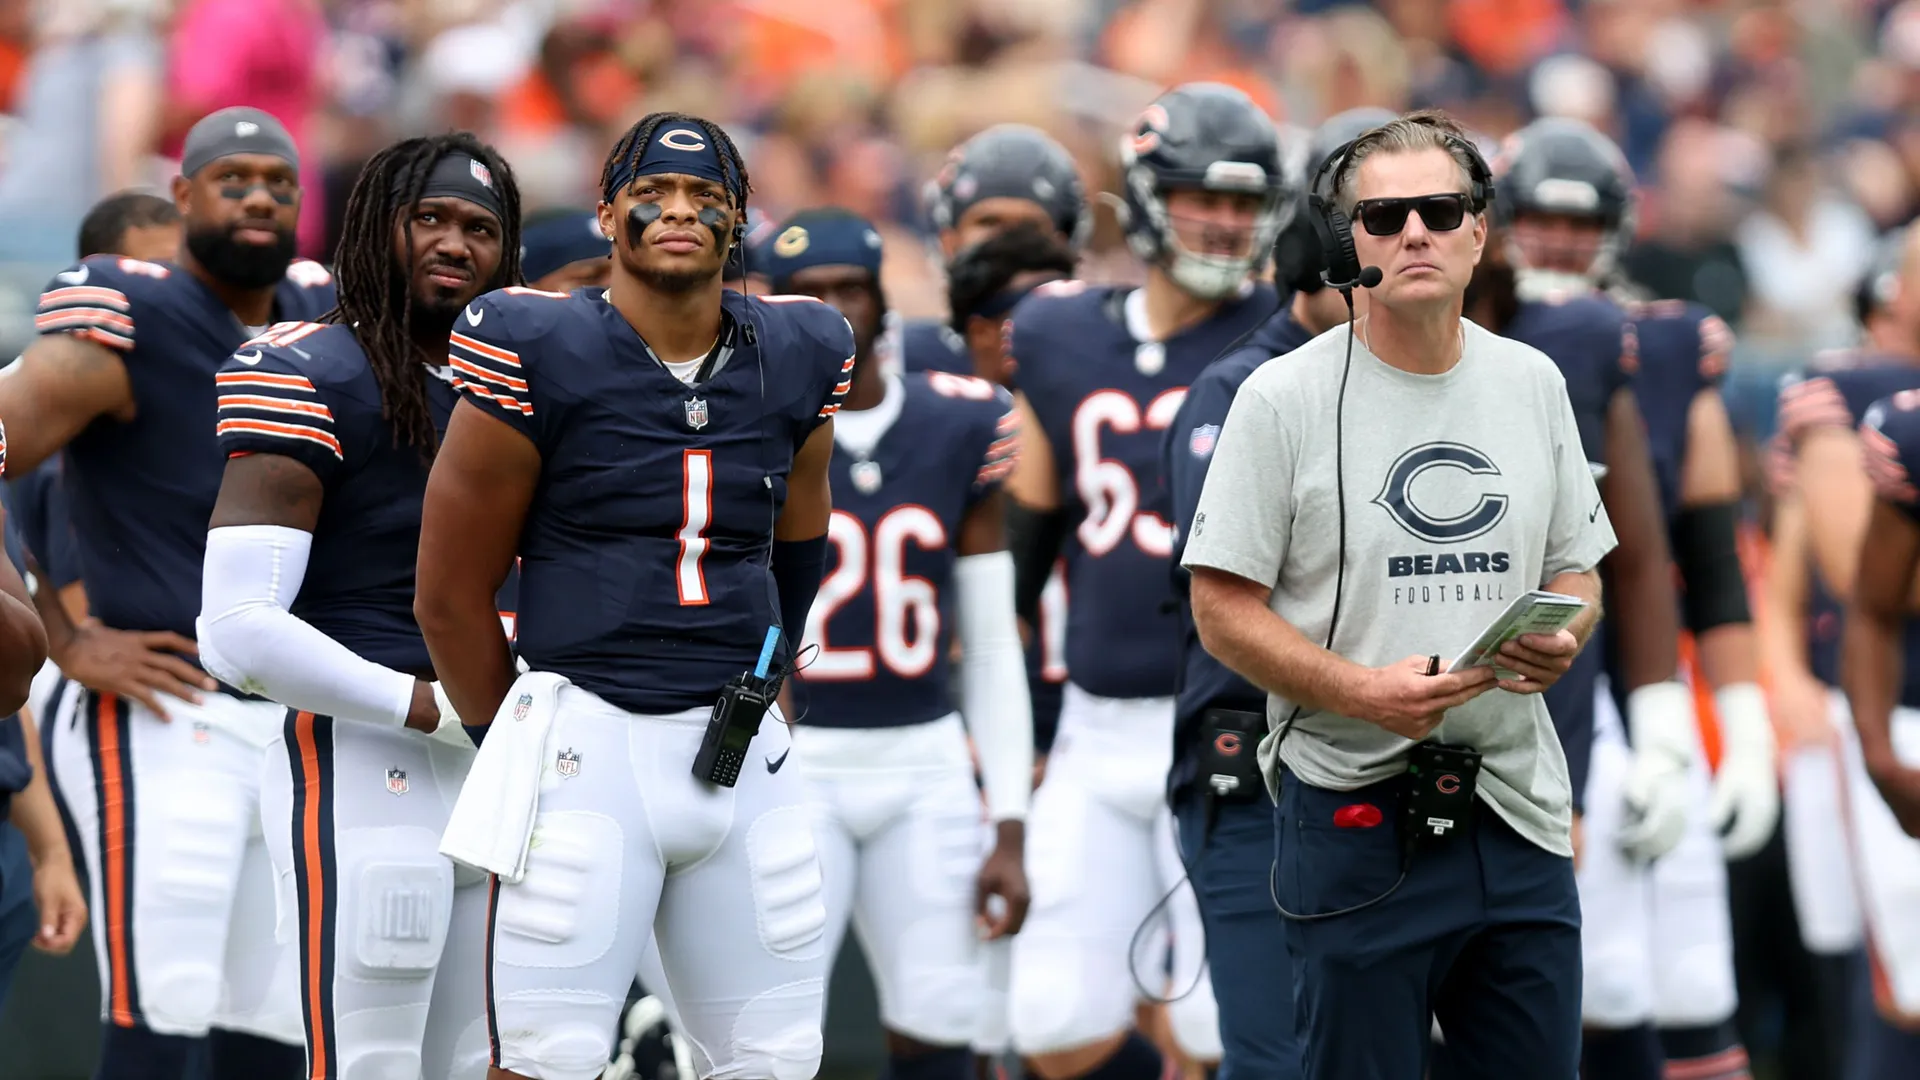 Chicago's Big Bet: Can Two Top Draft Picks Flip the Bears' Fortunes?